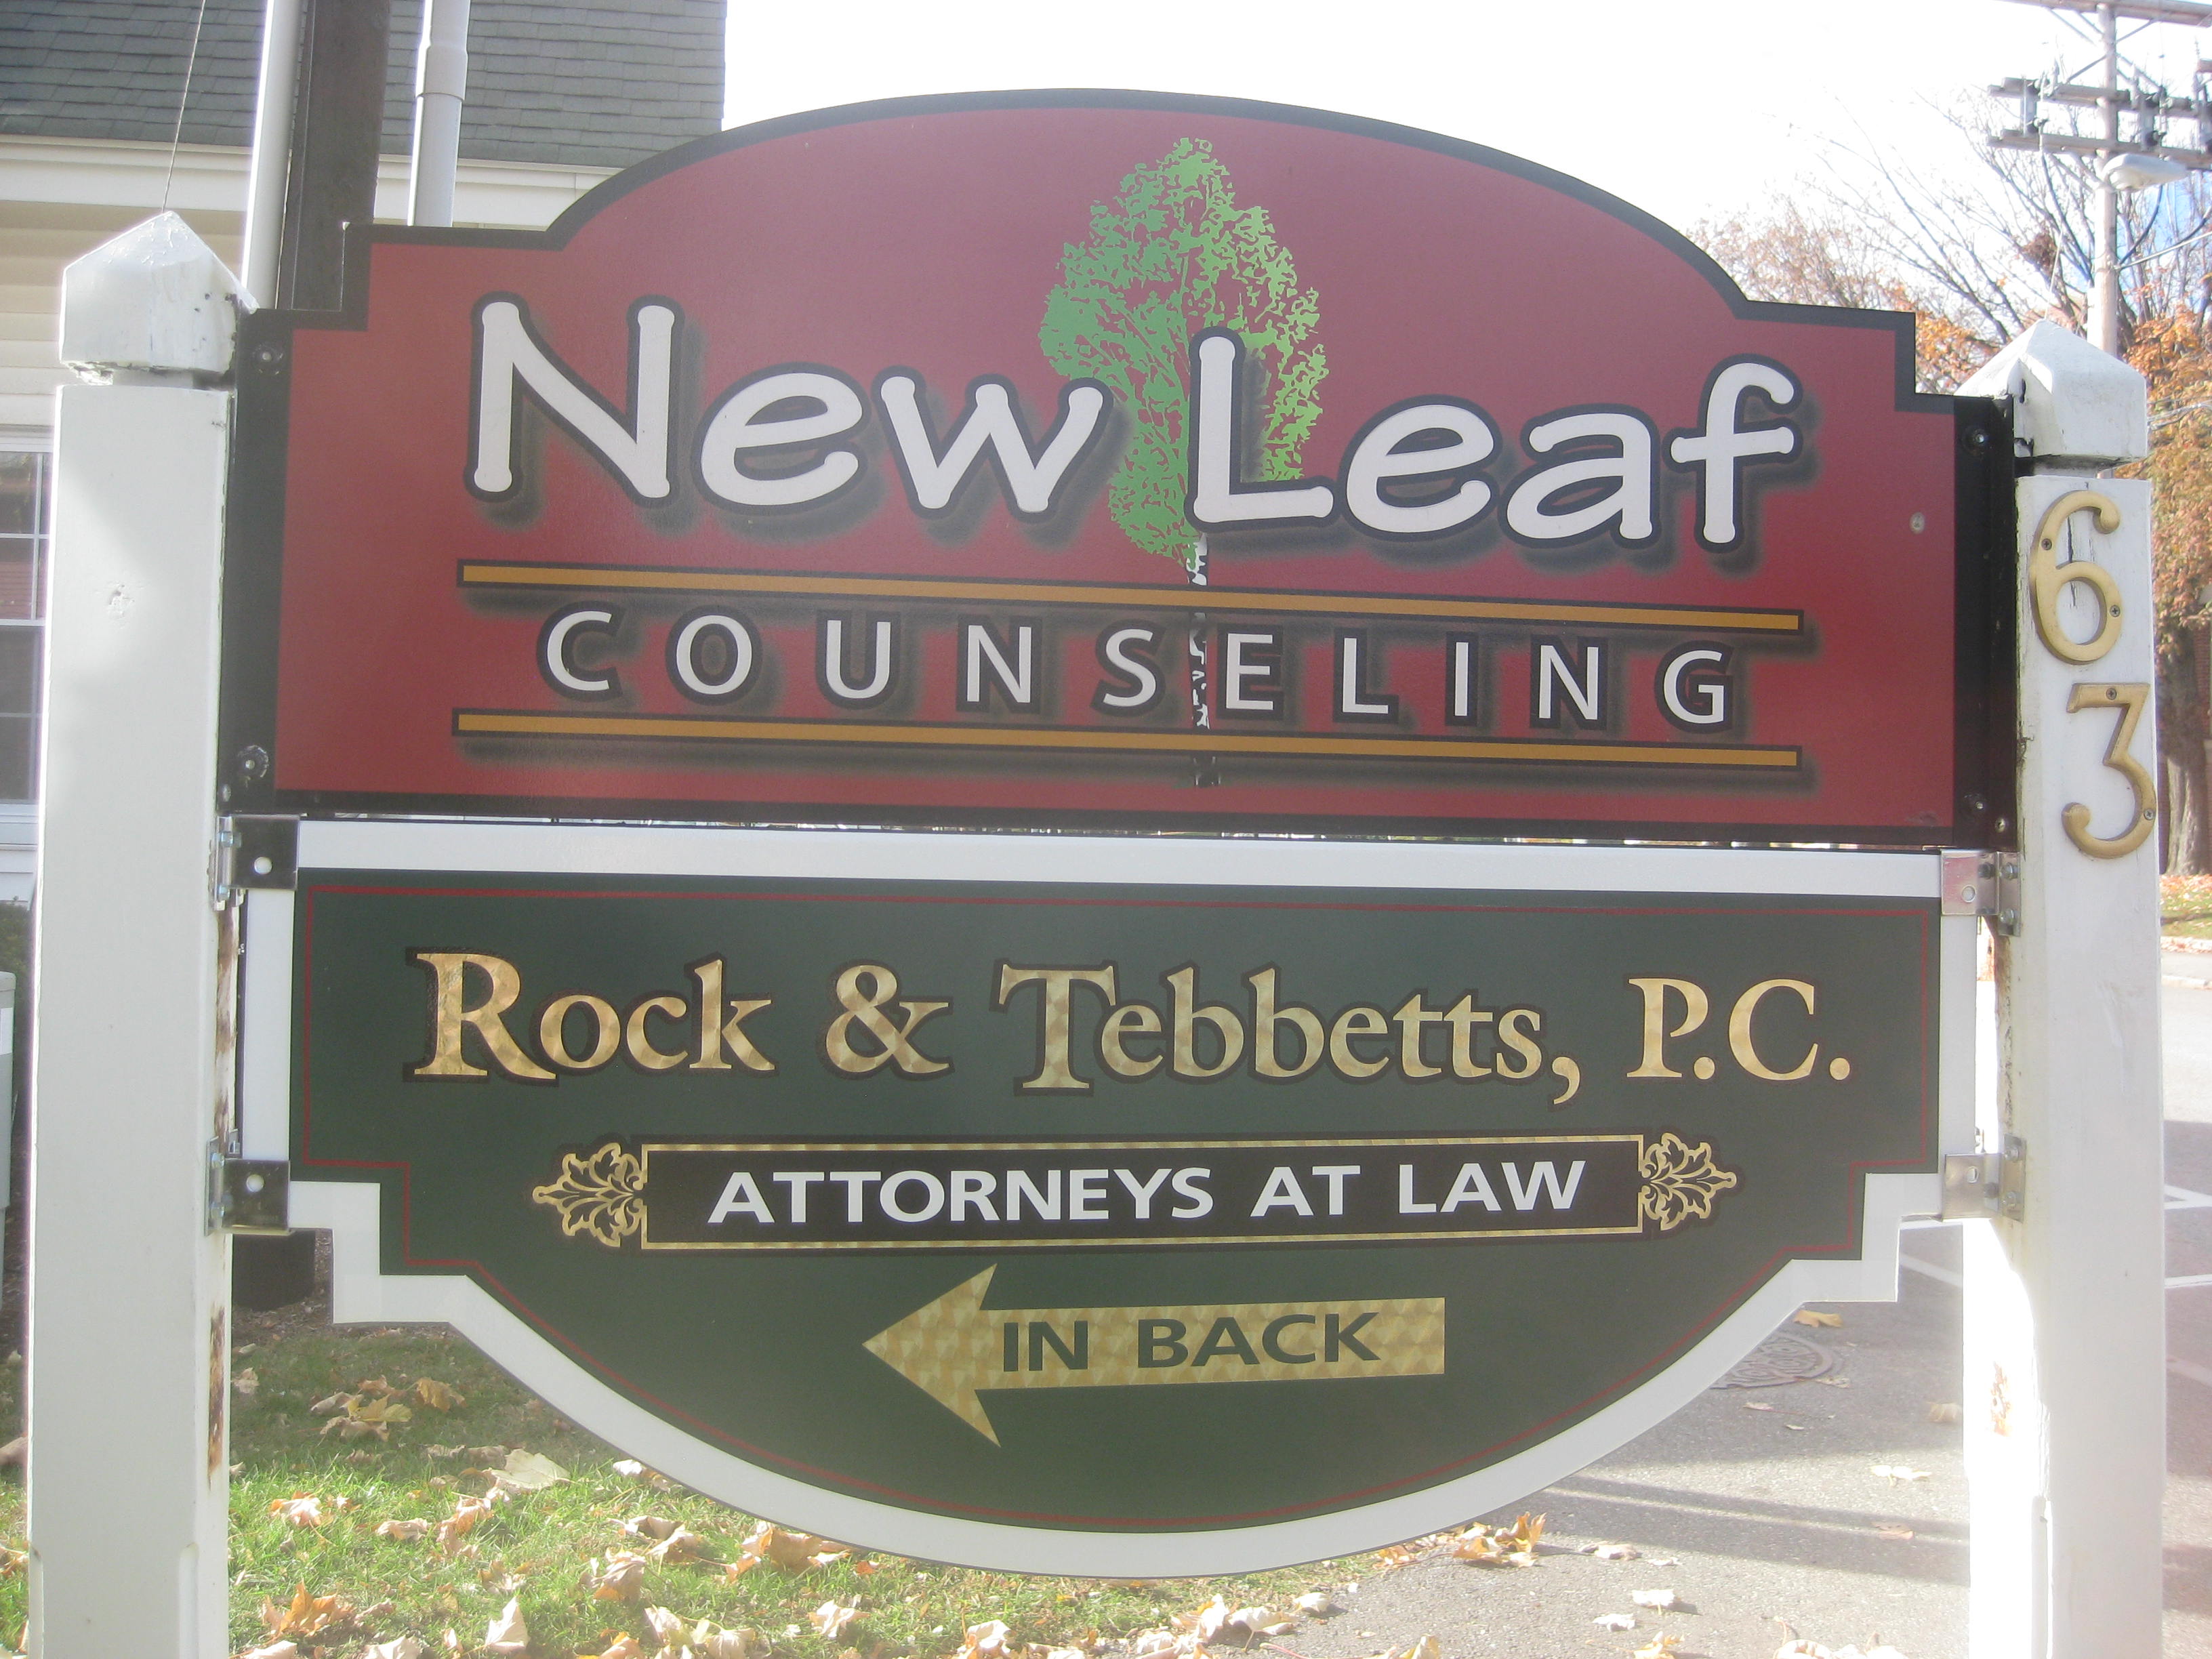 Another recent sign project just finished!